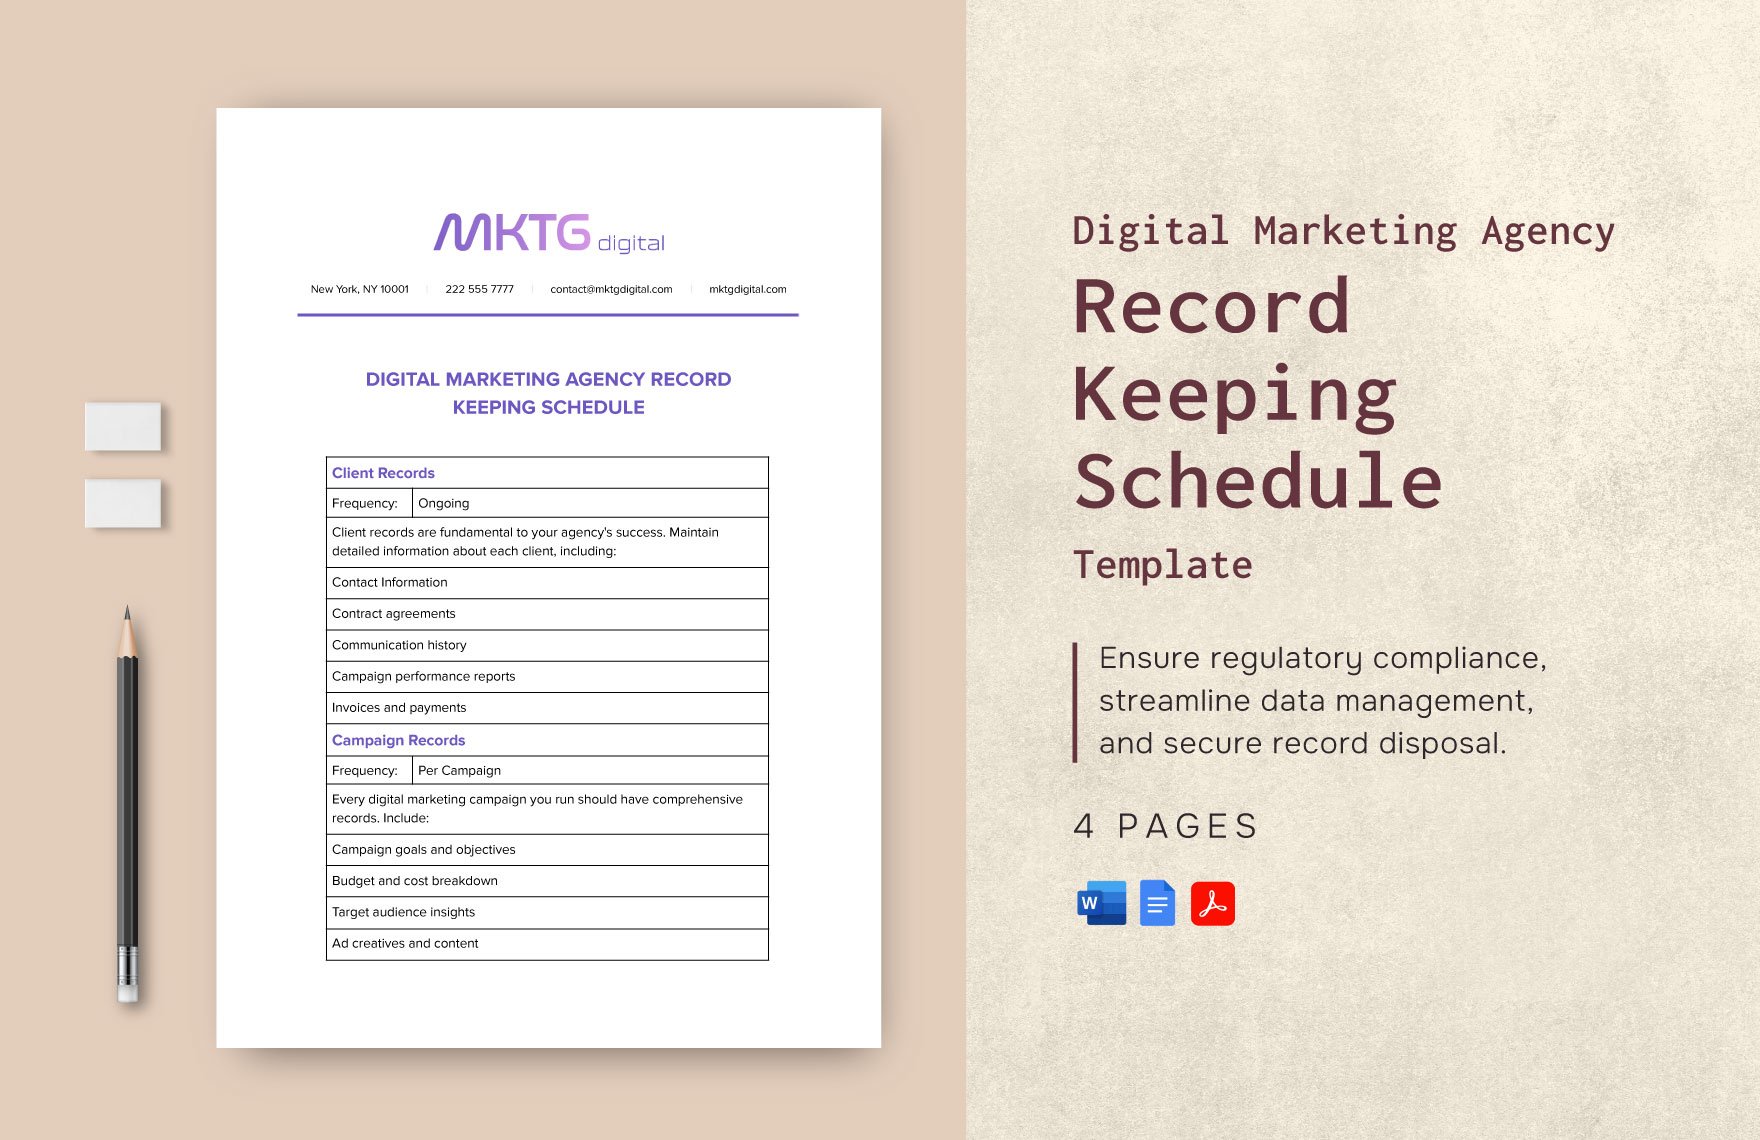 Digital Marketing Agency Record Keeping Schedule Template